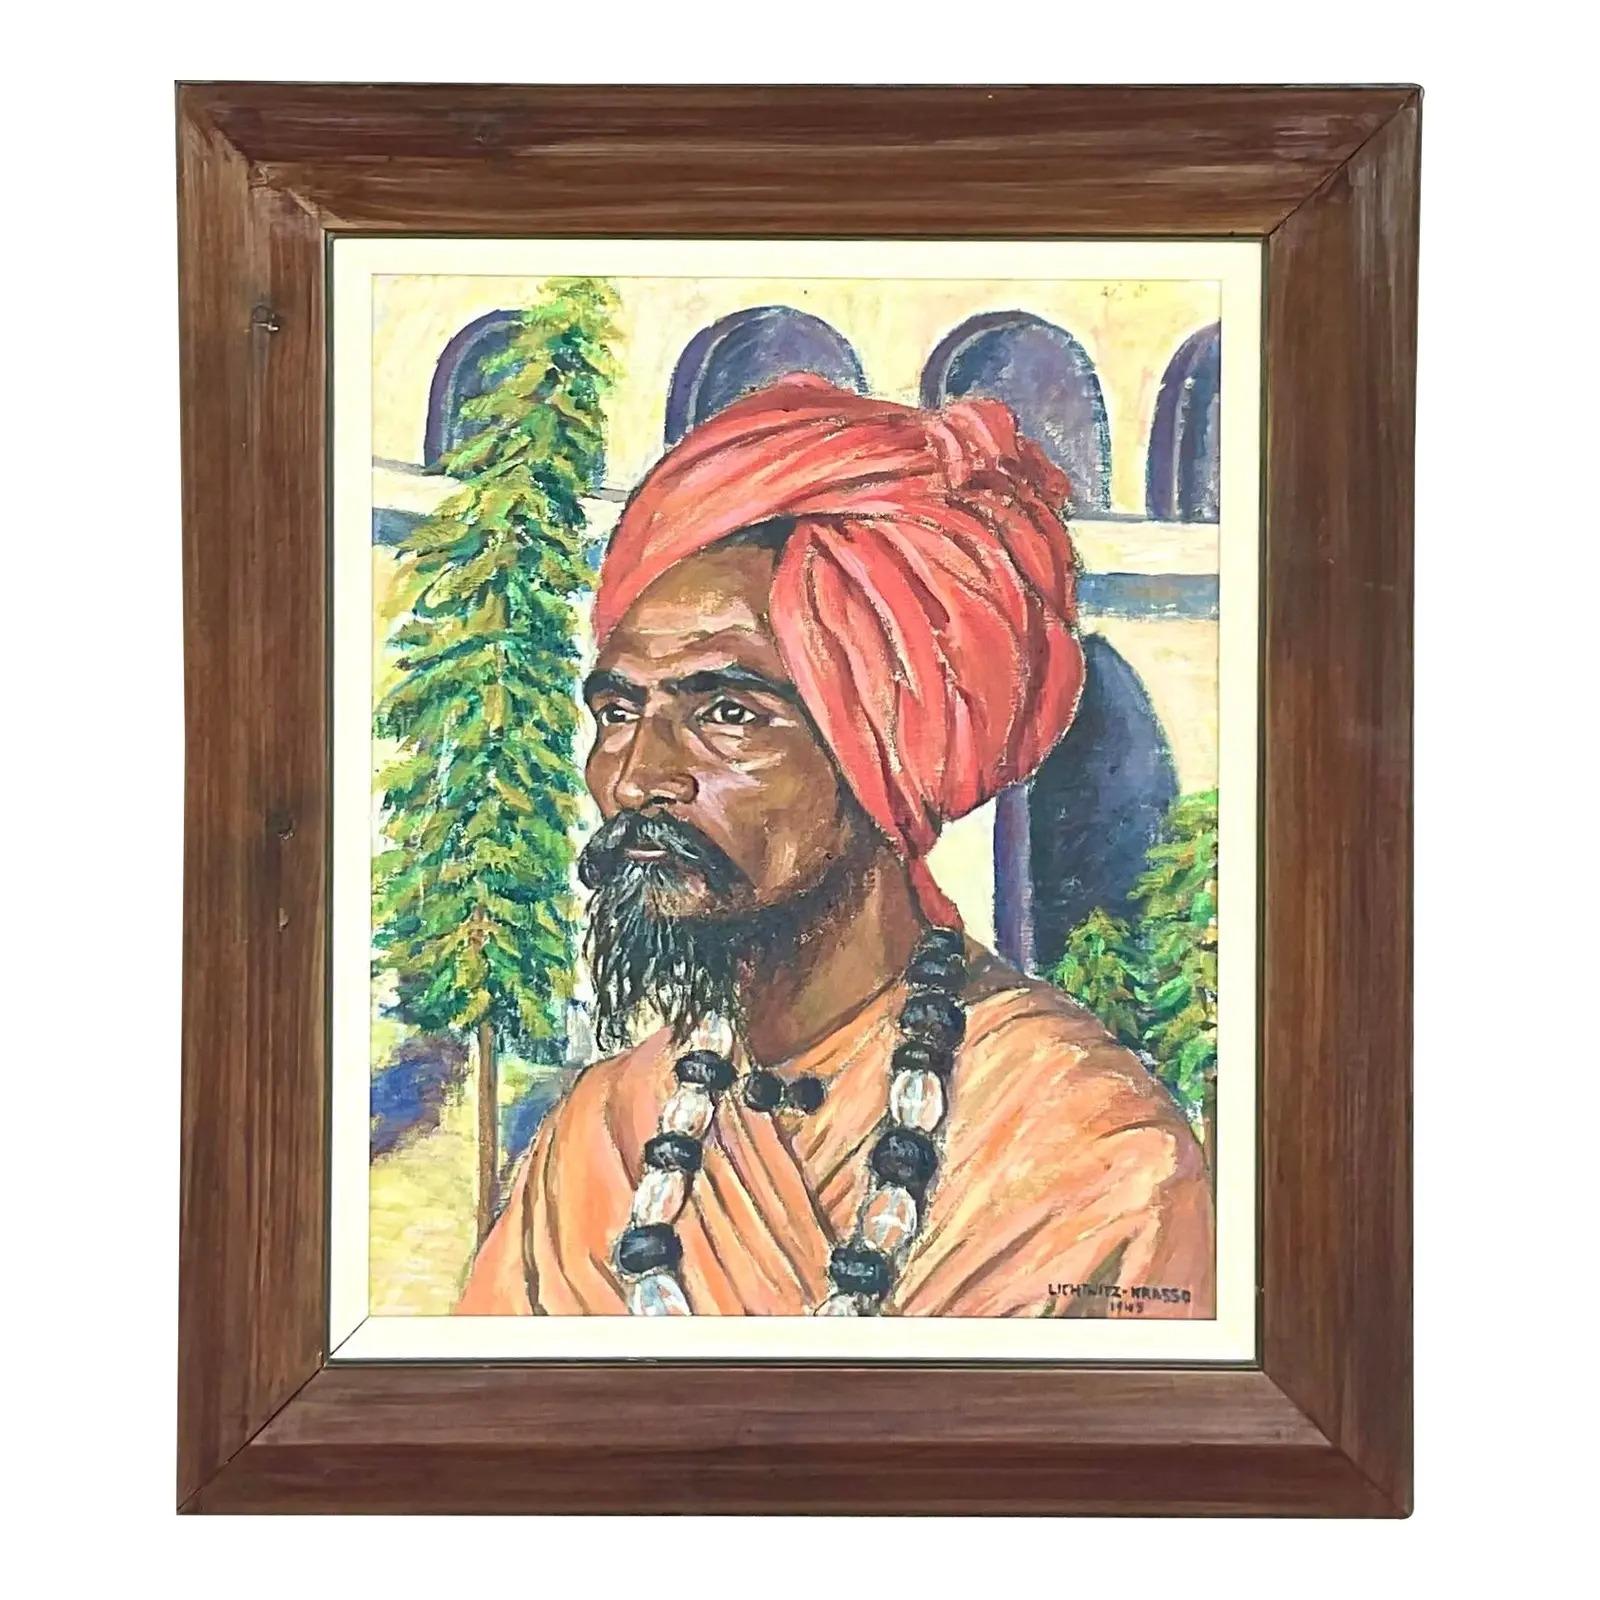 Incredible vintage 1941 original oil portrait. A chic composition of a handsome man in a red turban. A great dramatic addition to any room. Signed and dated by the artist. Acquired from a Palm Beach estate.